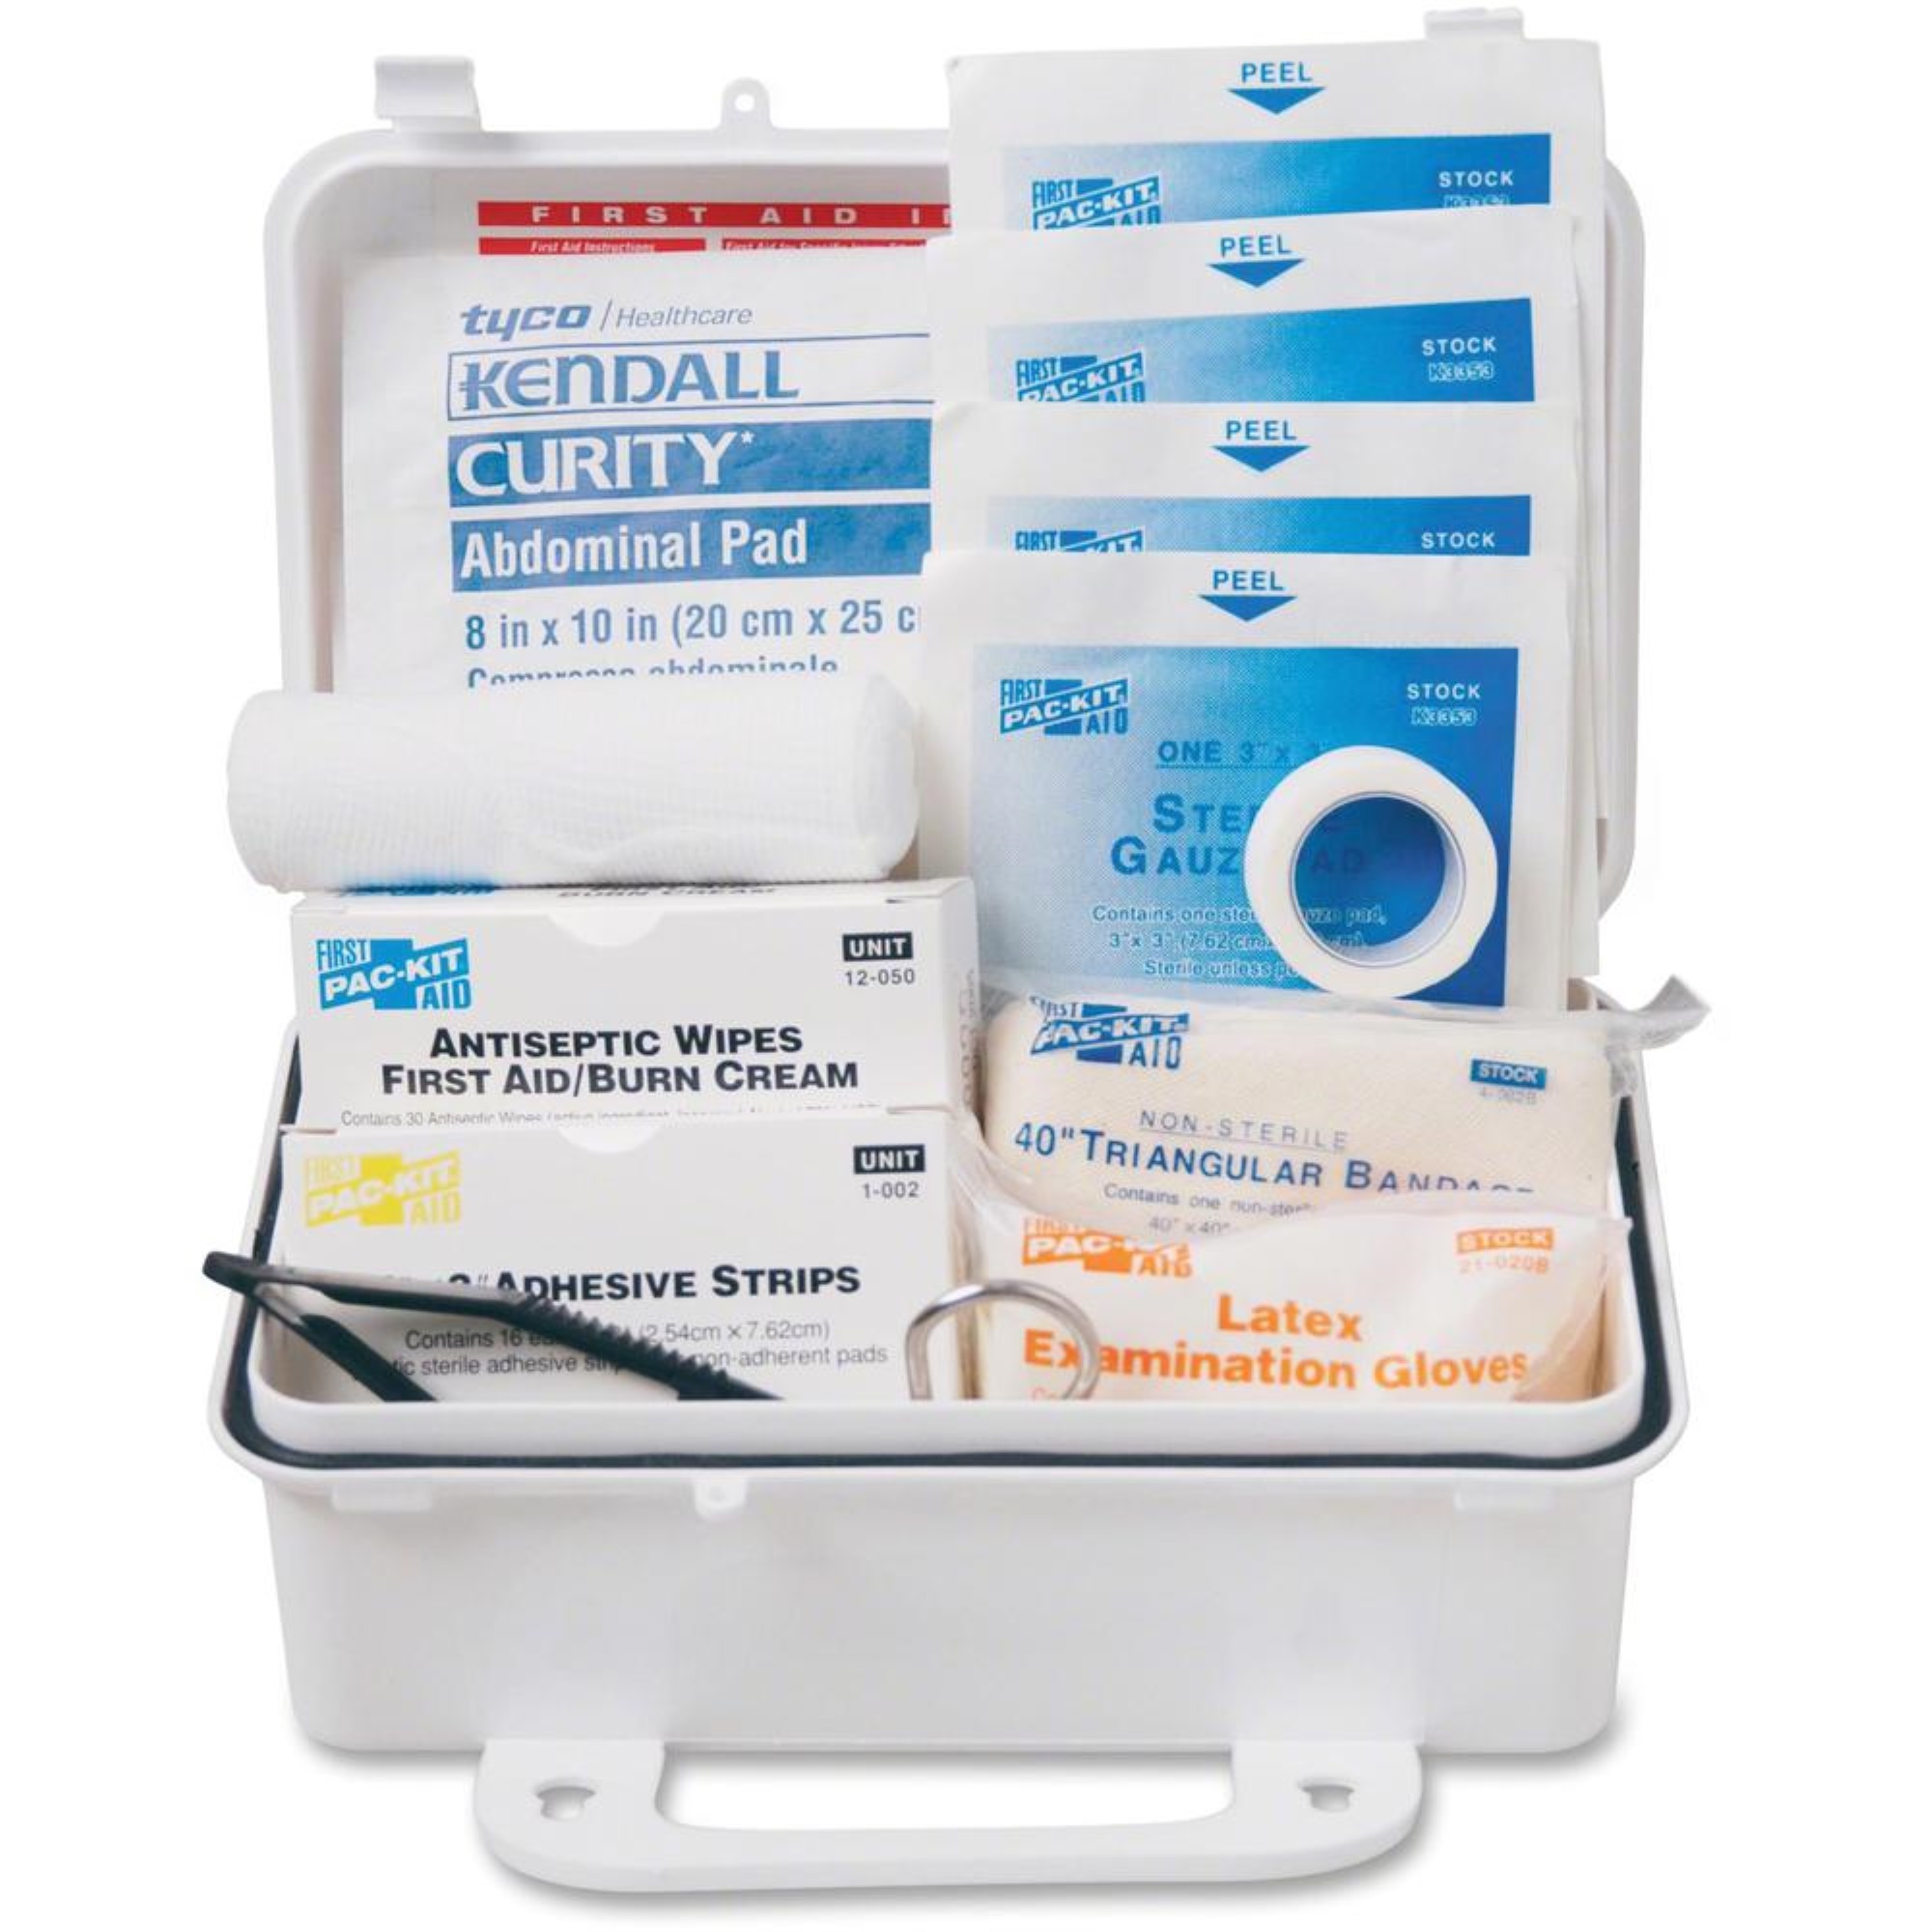 PackIt Cool Pac-Kit Safety Equipment 10-person First Aid Kit - 10 x Individual(s) - 4.5" Height x 7.5" Width x 2.8" Depth Length - P